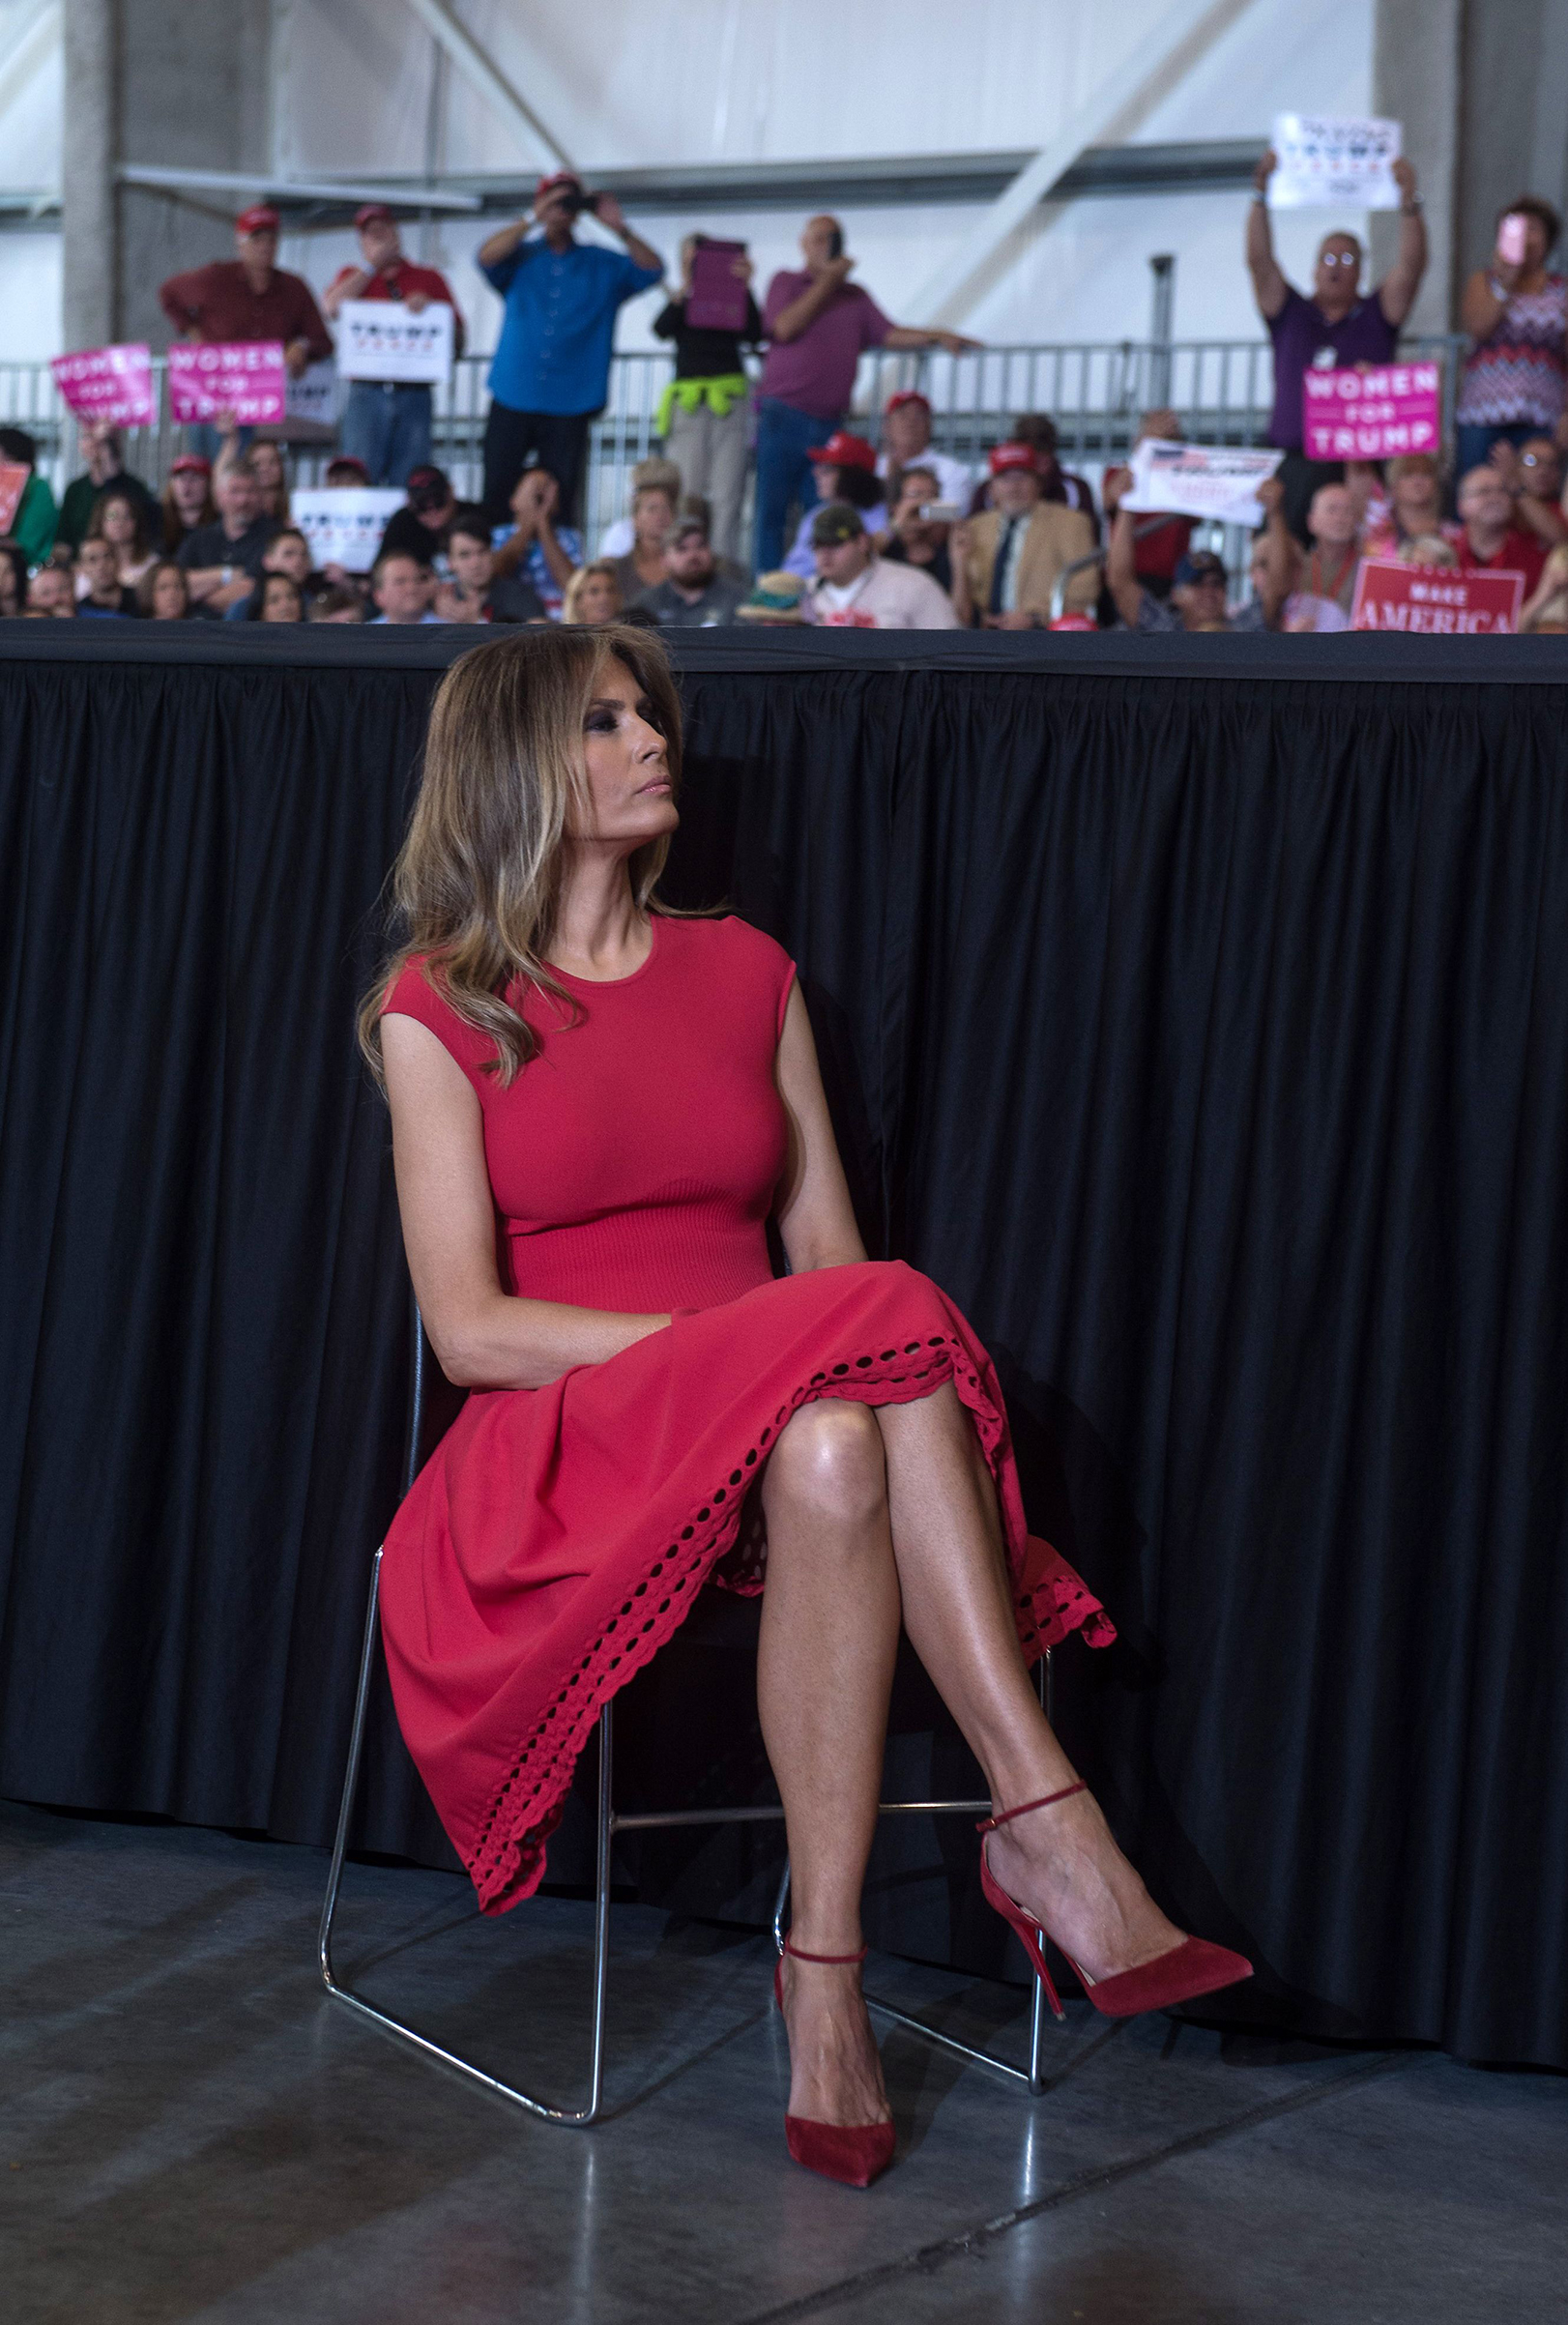 US First Lady Melania Trump wearing an Alexander McQueen red dress, listens as her husband, US President Donald Trump addresses a rally in Melbourne, Florida, on February 18, 2017